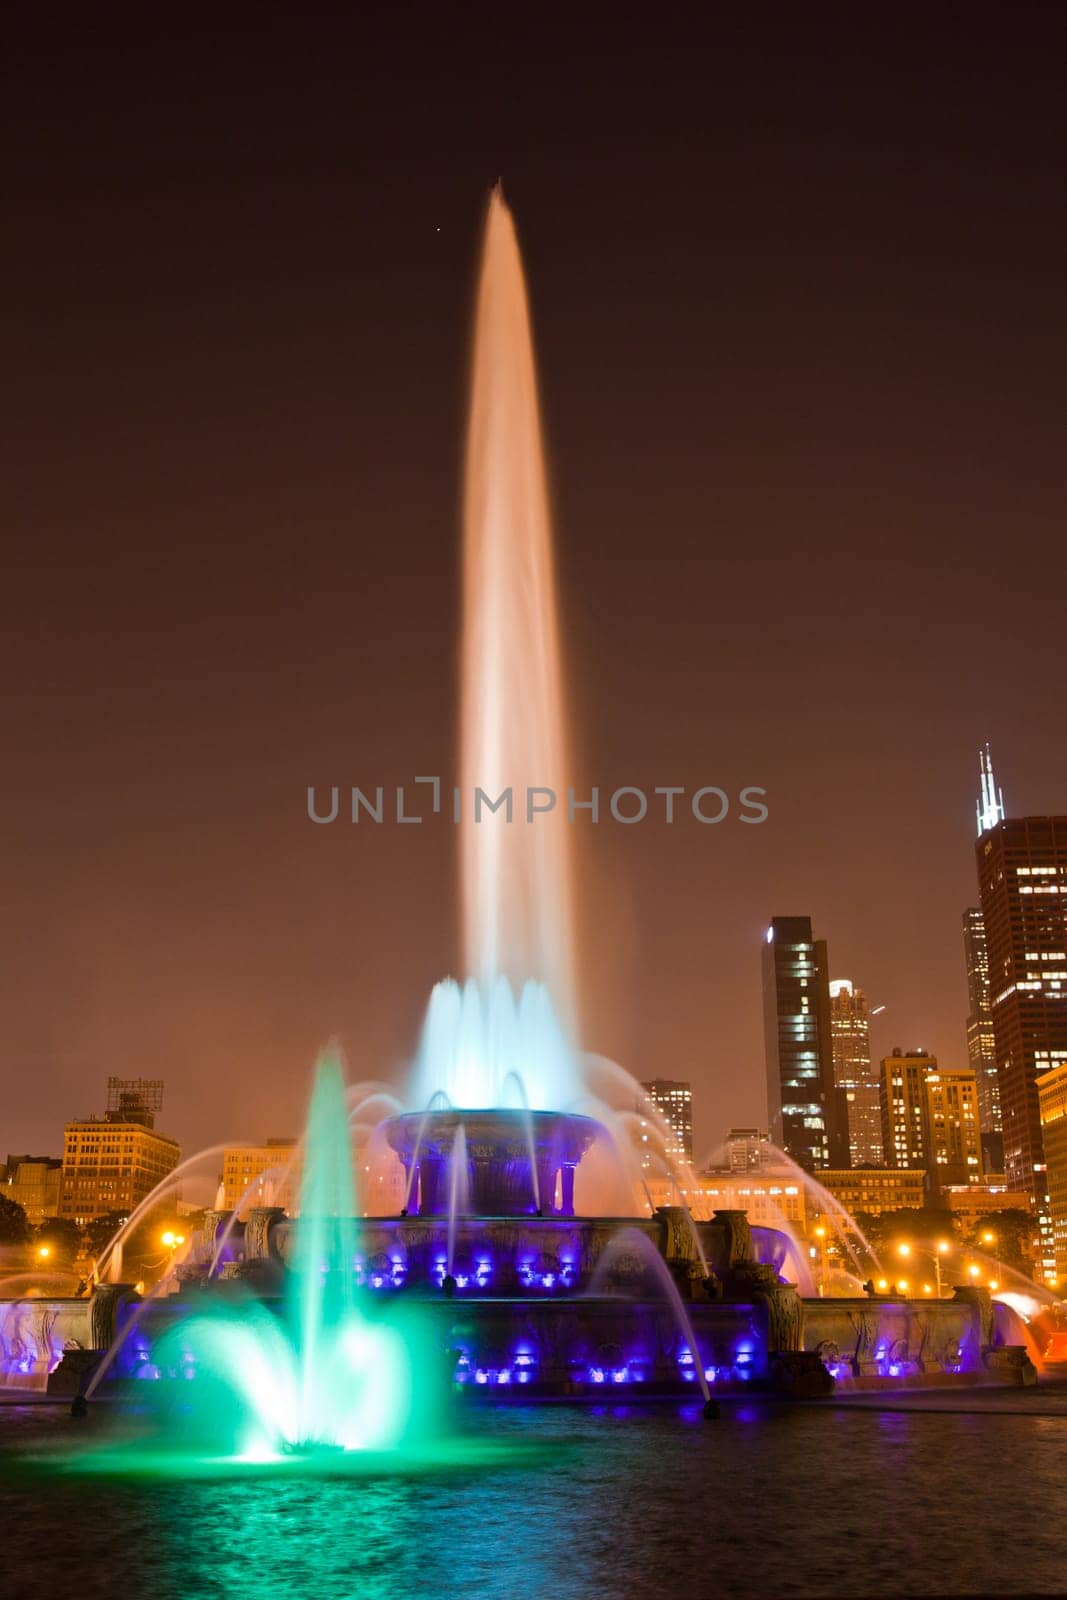 Illuminated Fountain against Chicago Skyline at Night by njproductions